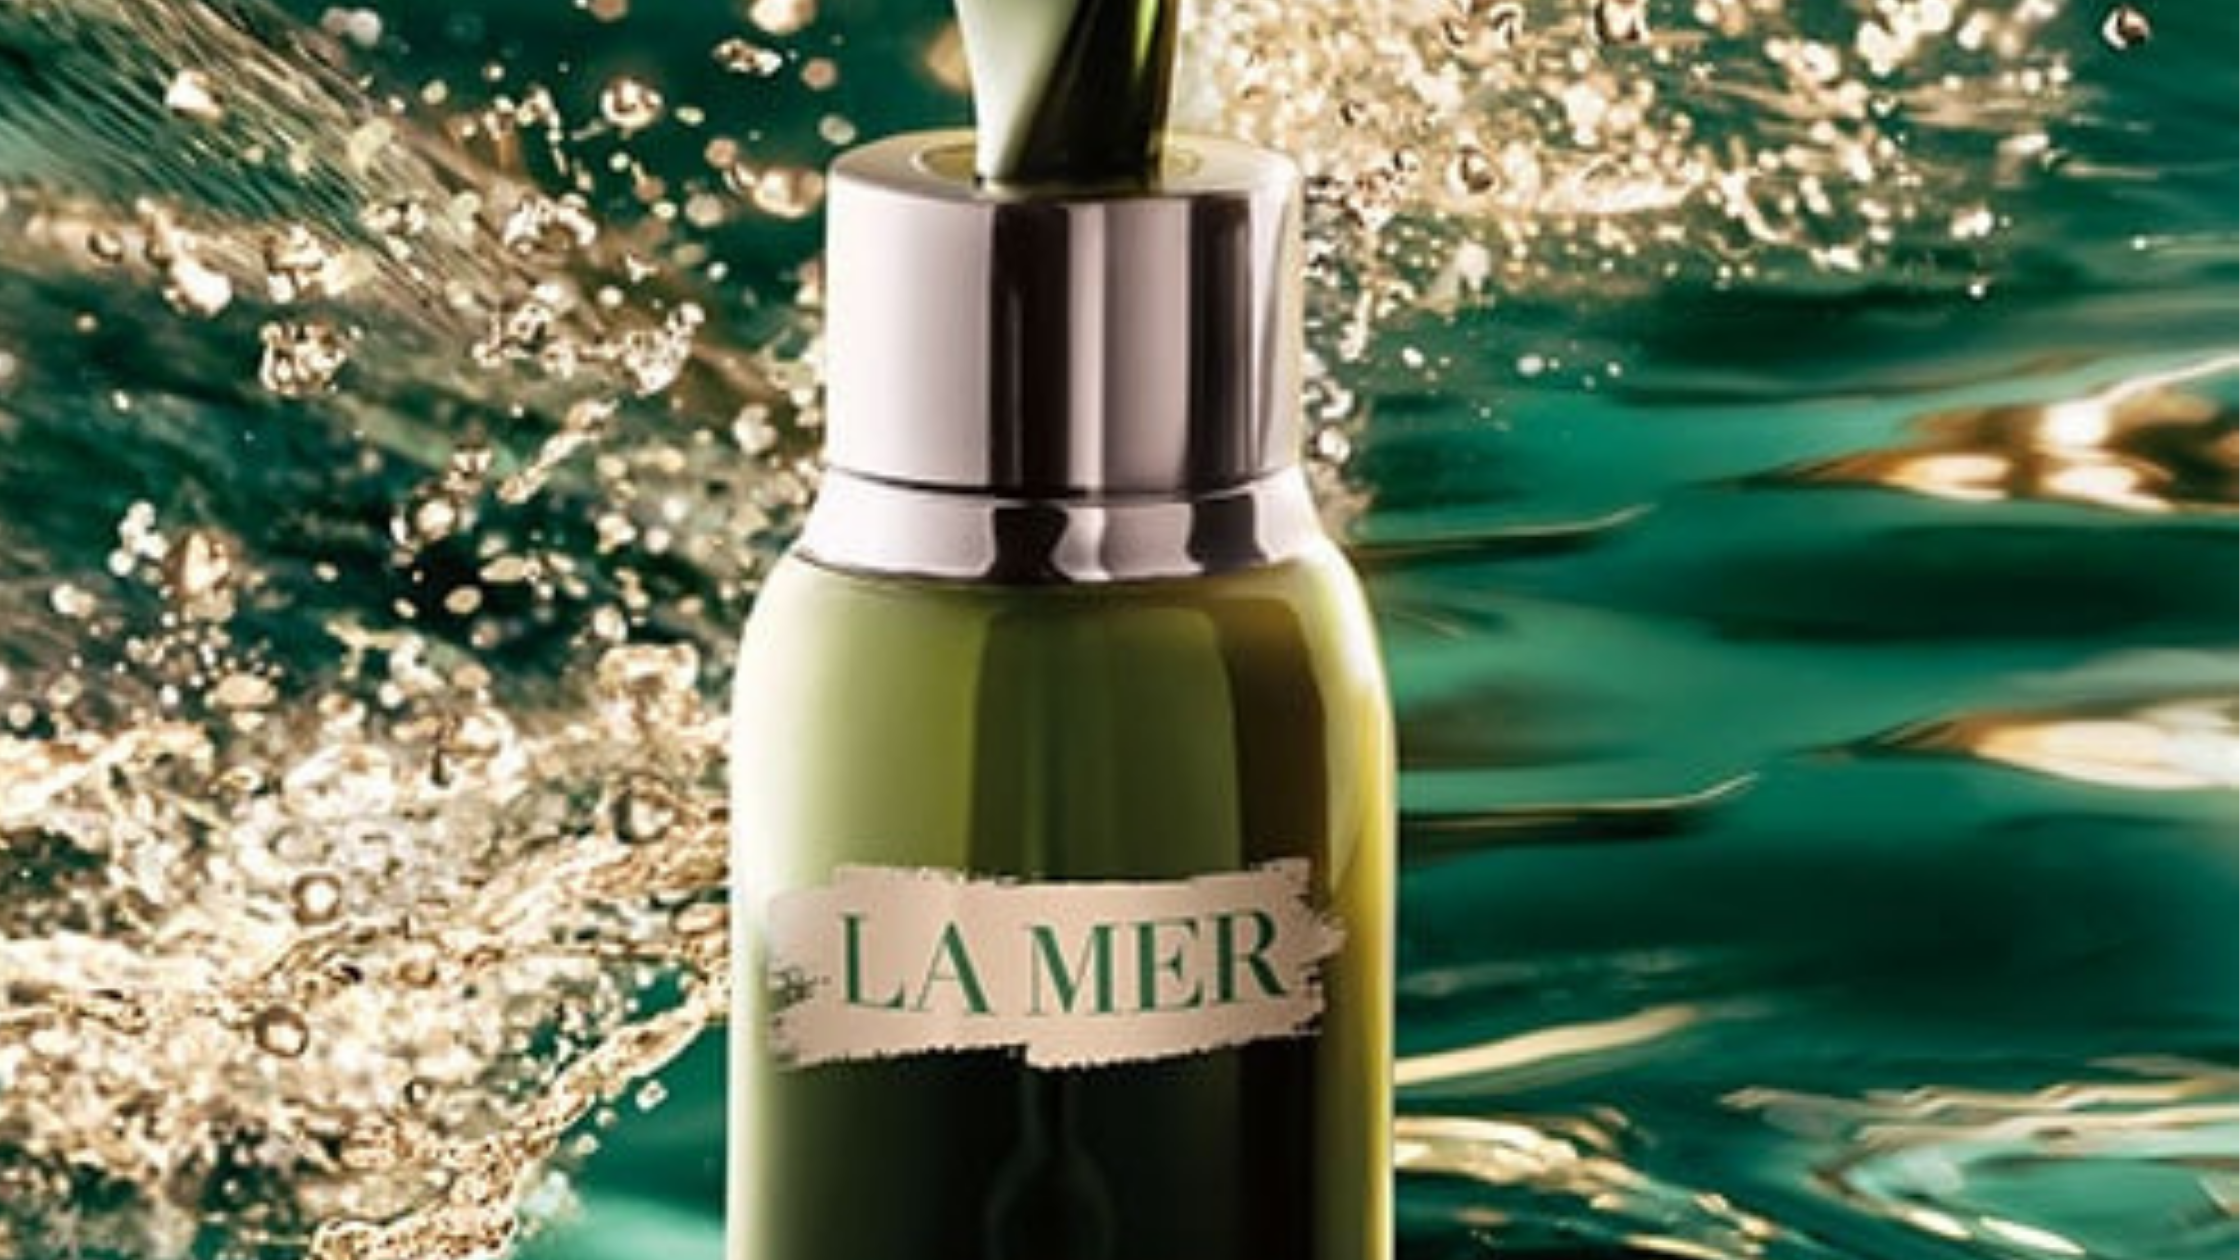 La Mer example to bust the brand story myth of better at everything